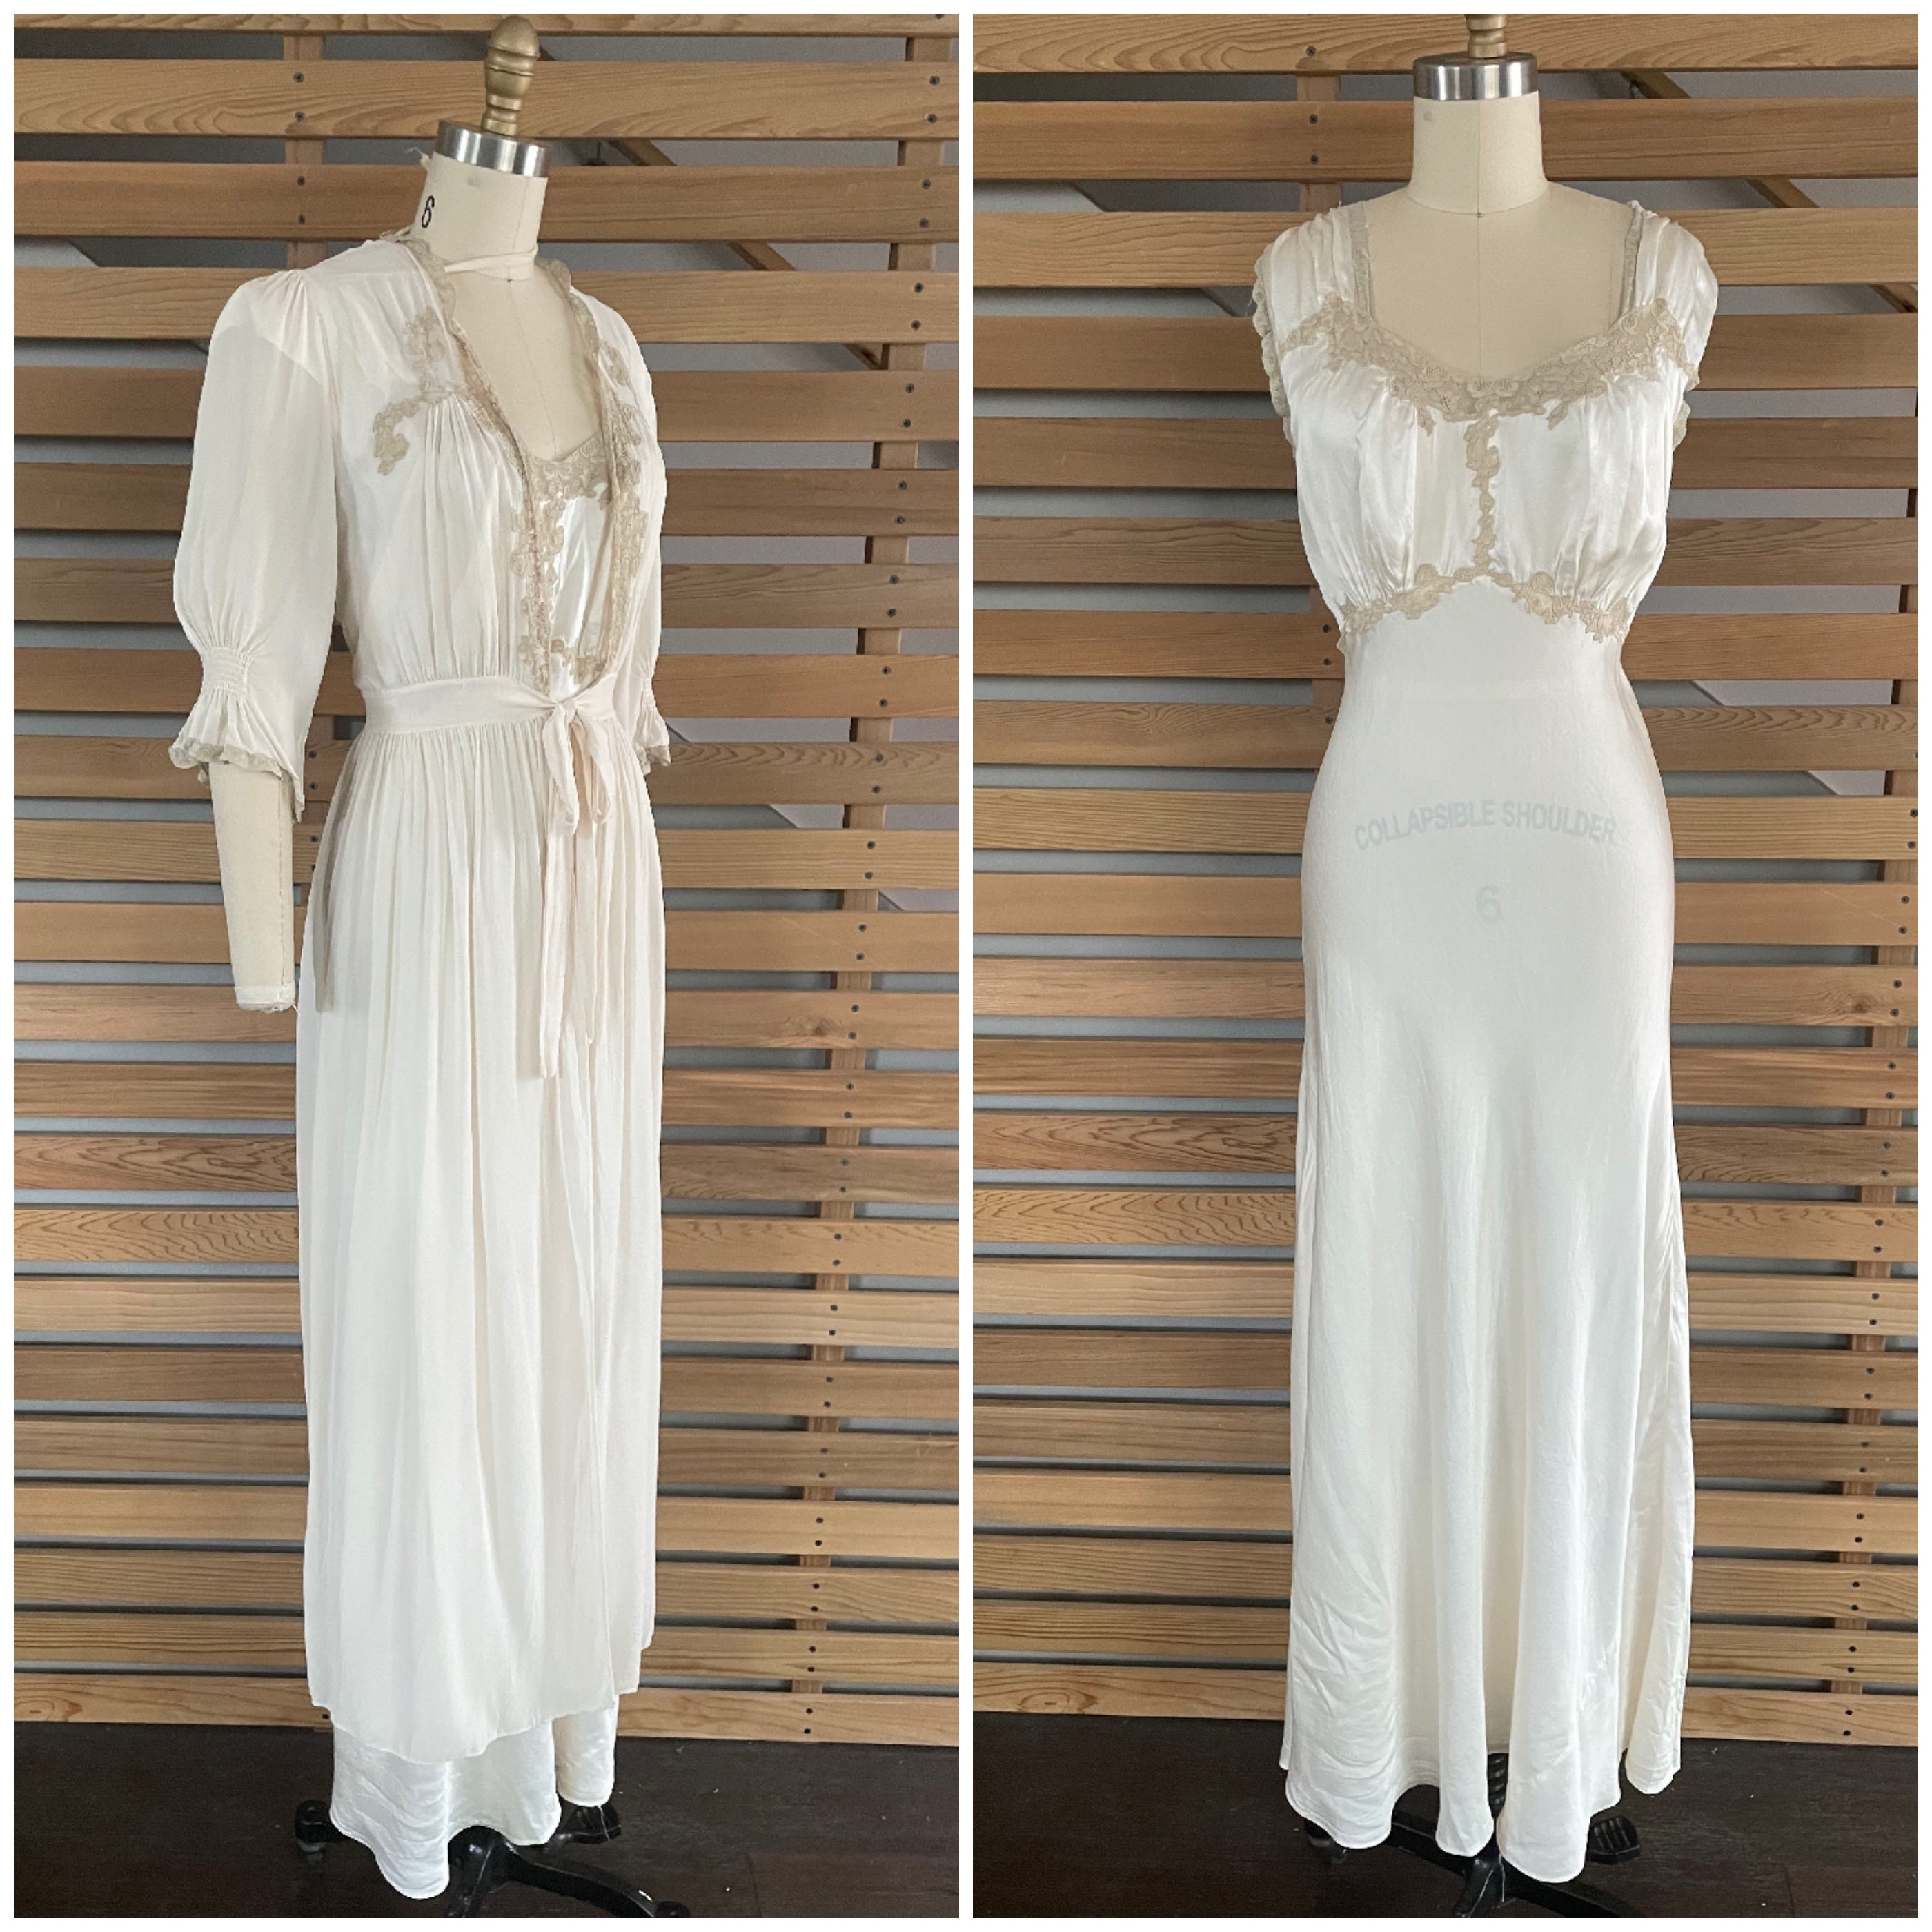 1930s Negligee Set | 1930s Silk Bias Cut Nightgown and Negligee Set ...